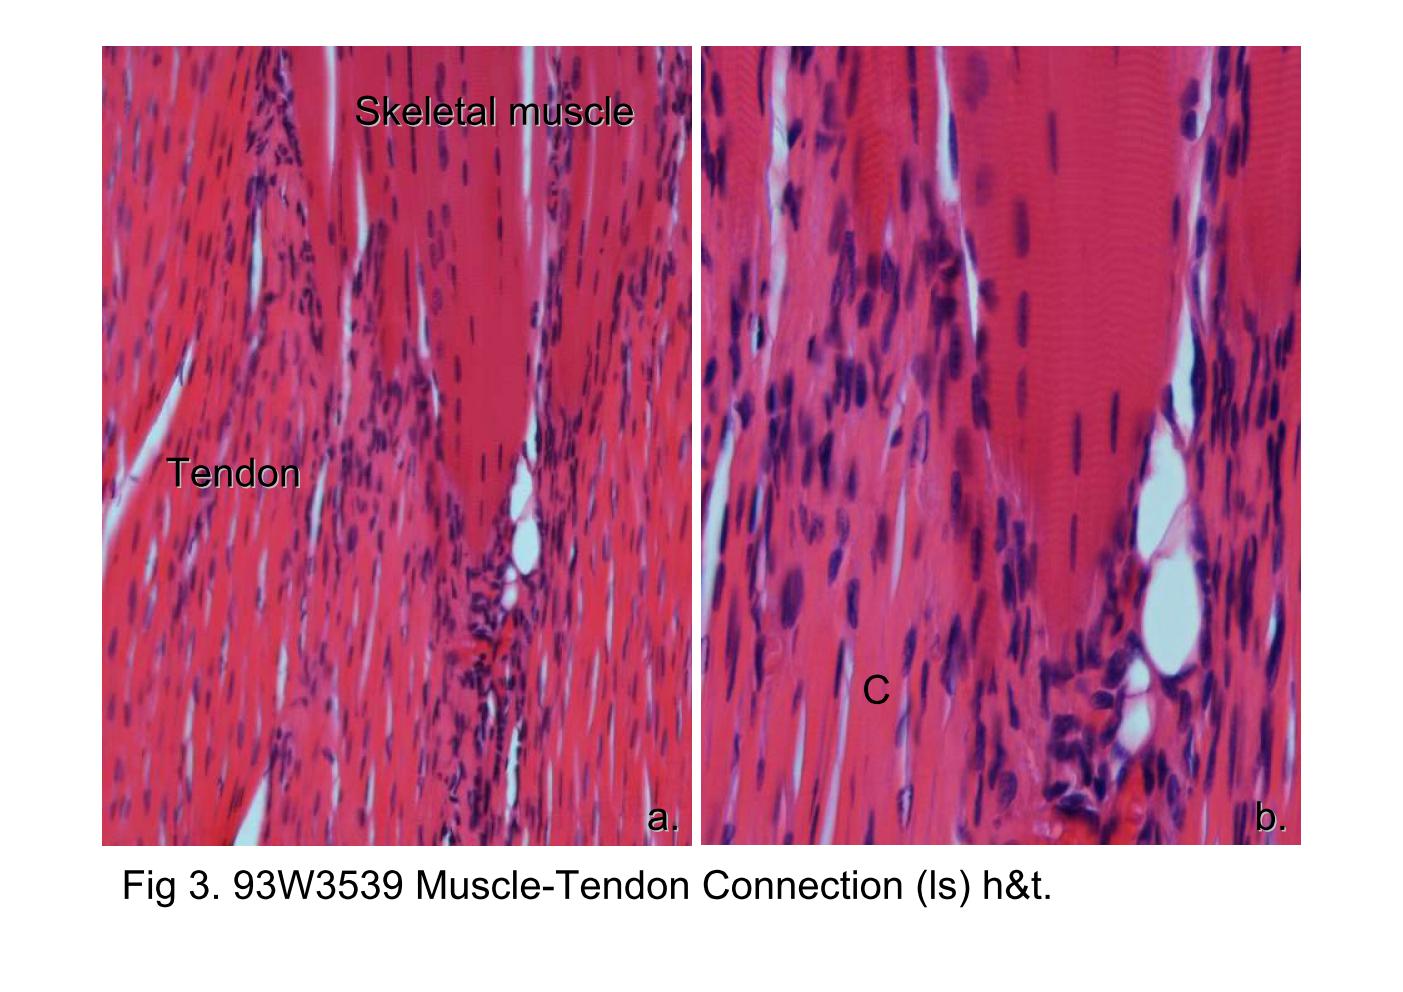 block6-2_09.jpg - Fig 3. 93W3539 Muscle-Tendon Connection (ls) h&t.Fig 3a shows the junction of the skeletal muscle fibers andtendon. Notice the striation characteristics of skeletal muscleand the abundances of collagens fibers (C) in the tendon.Fig 3b shows the high-magnification of 3a. Examined thediscrepancy of nucleus location between skeletal musclesand tendon tissues: peripherally location in skeletal muscle vs.dispersed within collagen fibres in the tendon.